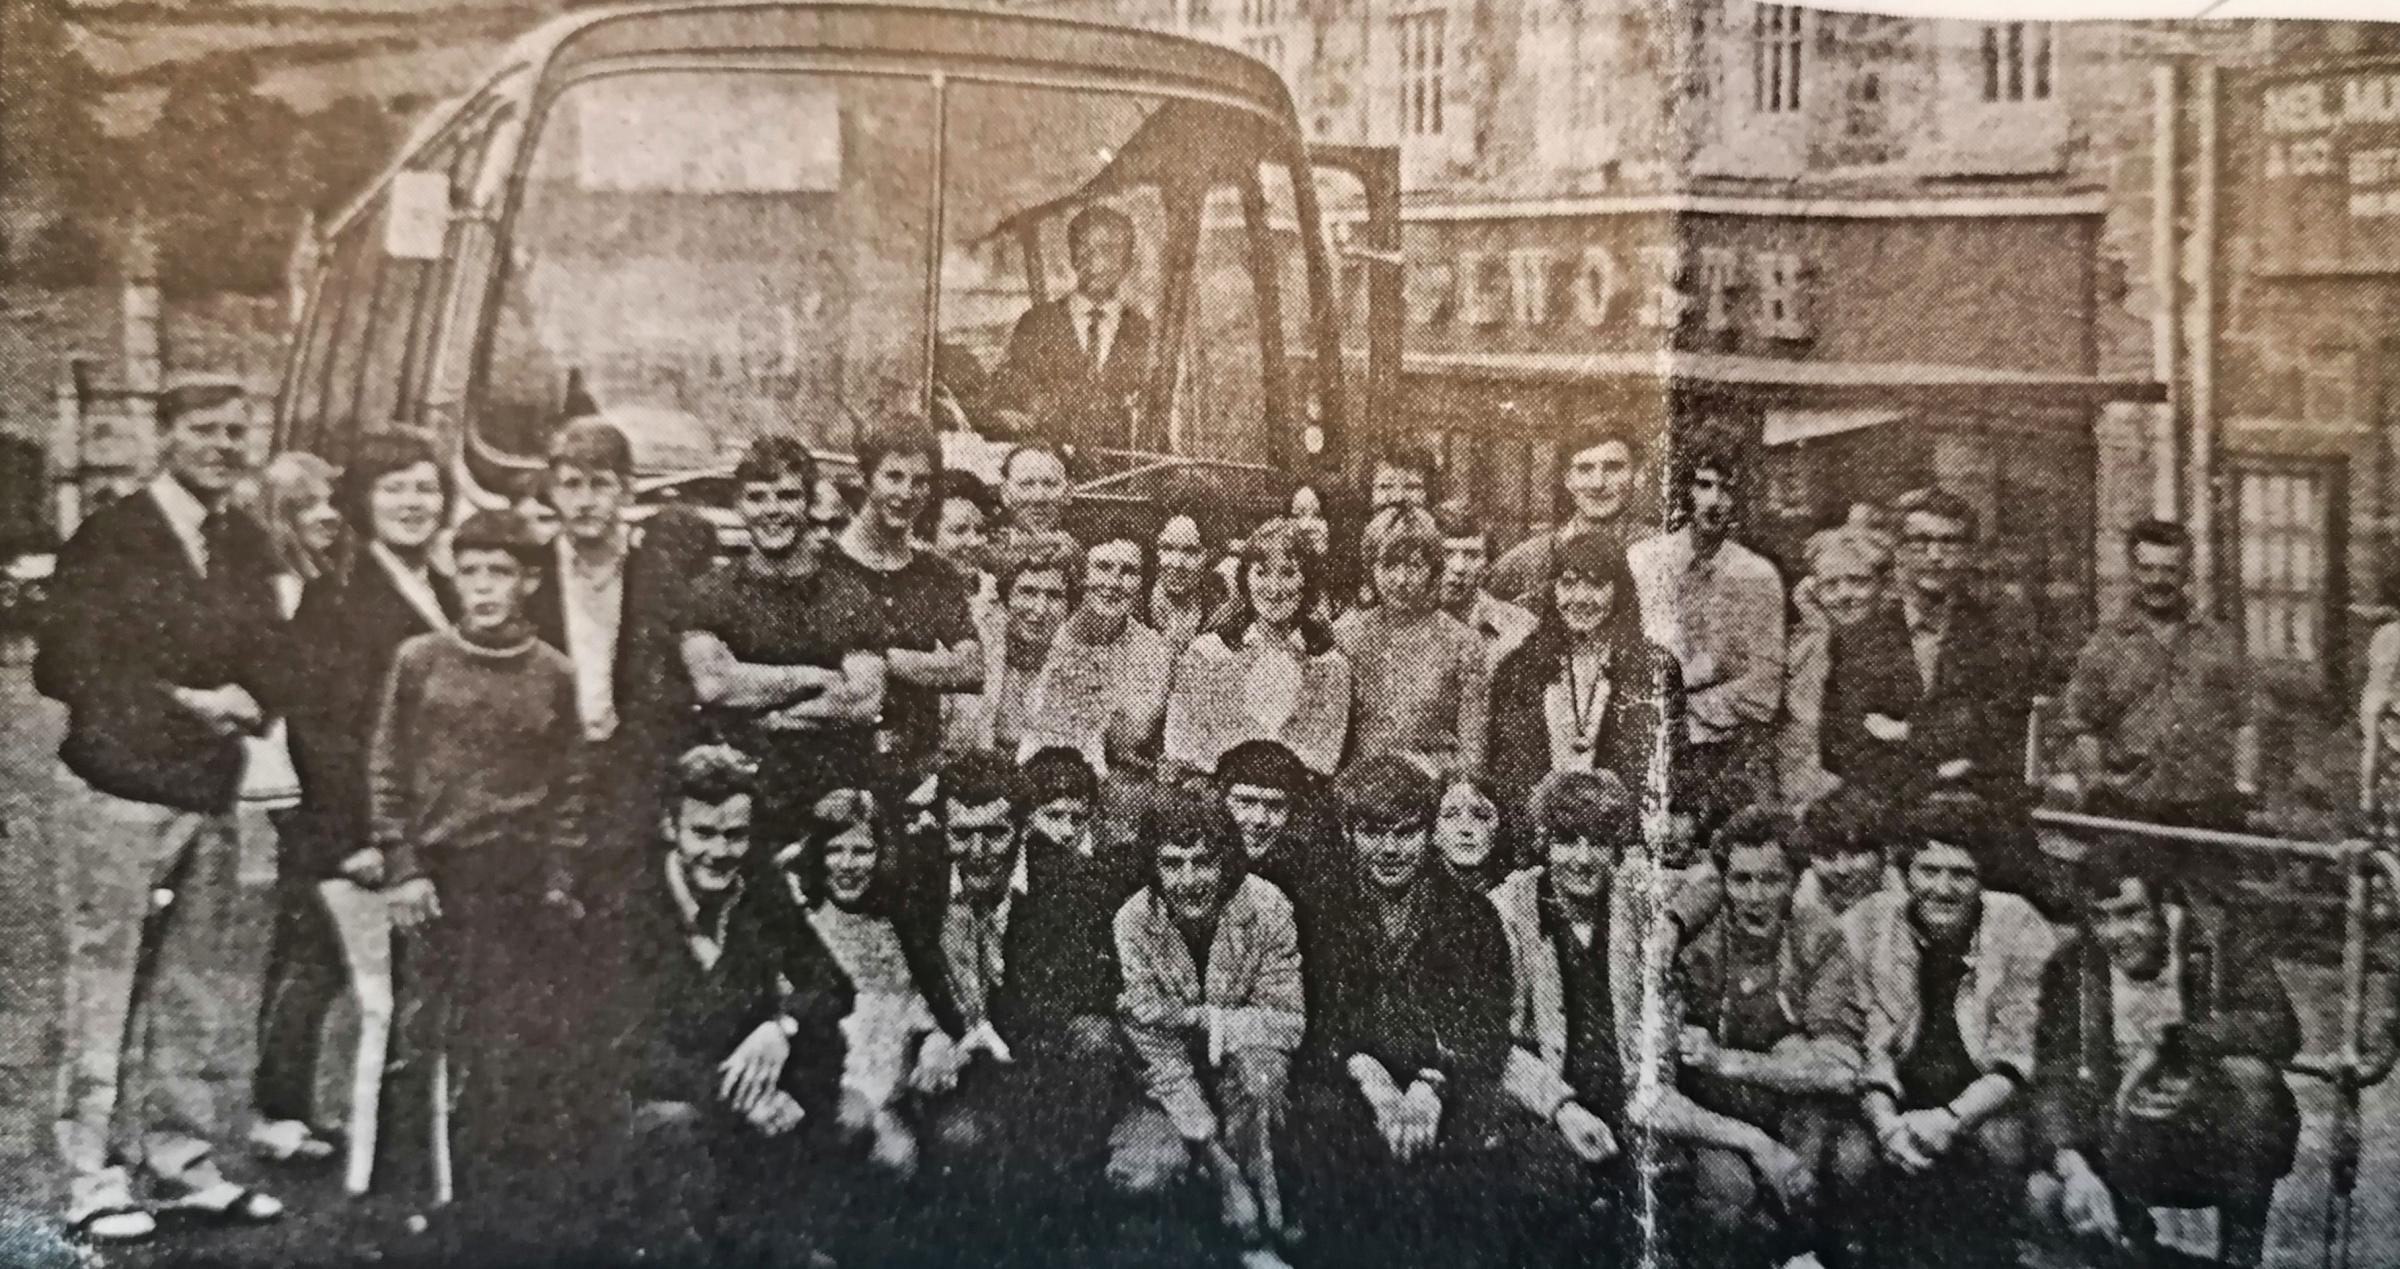 Young youth club members ready to go on a trip to Sasso Marconi in 1970